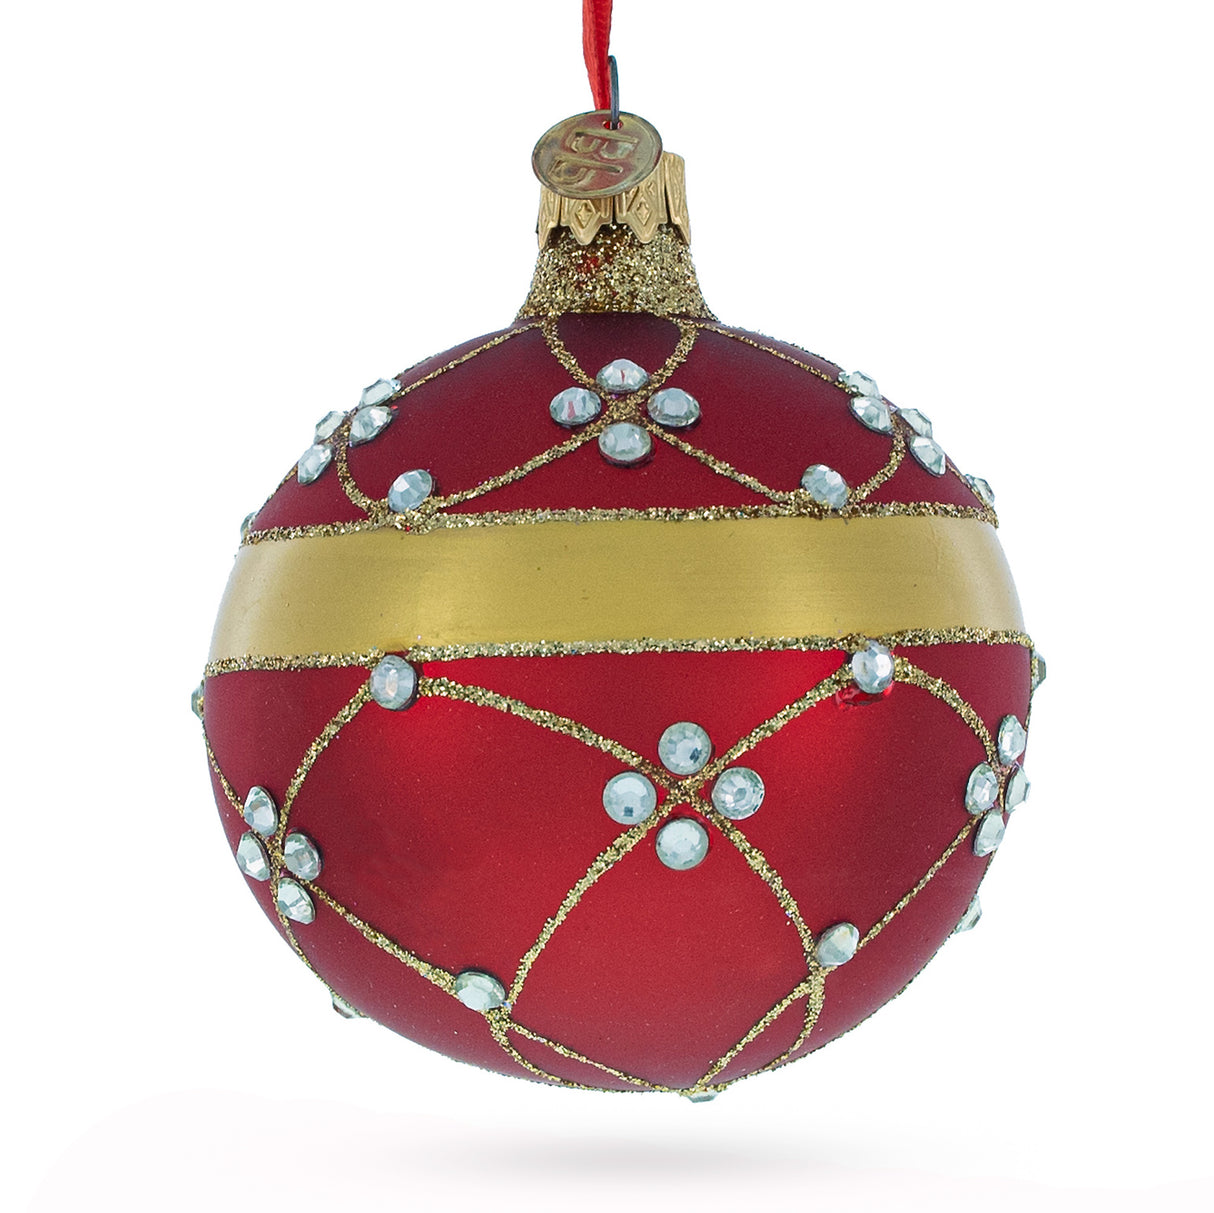 Regal Radiance: Glistening Diamond Trellis Pattern on Rich Ruby Red Hand-Painted Blown Glass Ball Christmas Ornament 3.25 Inches in Red color, Round shape